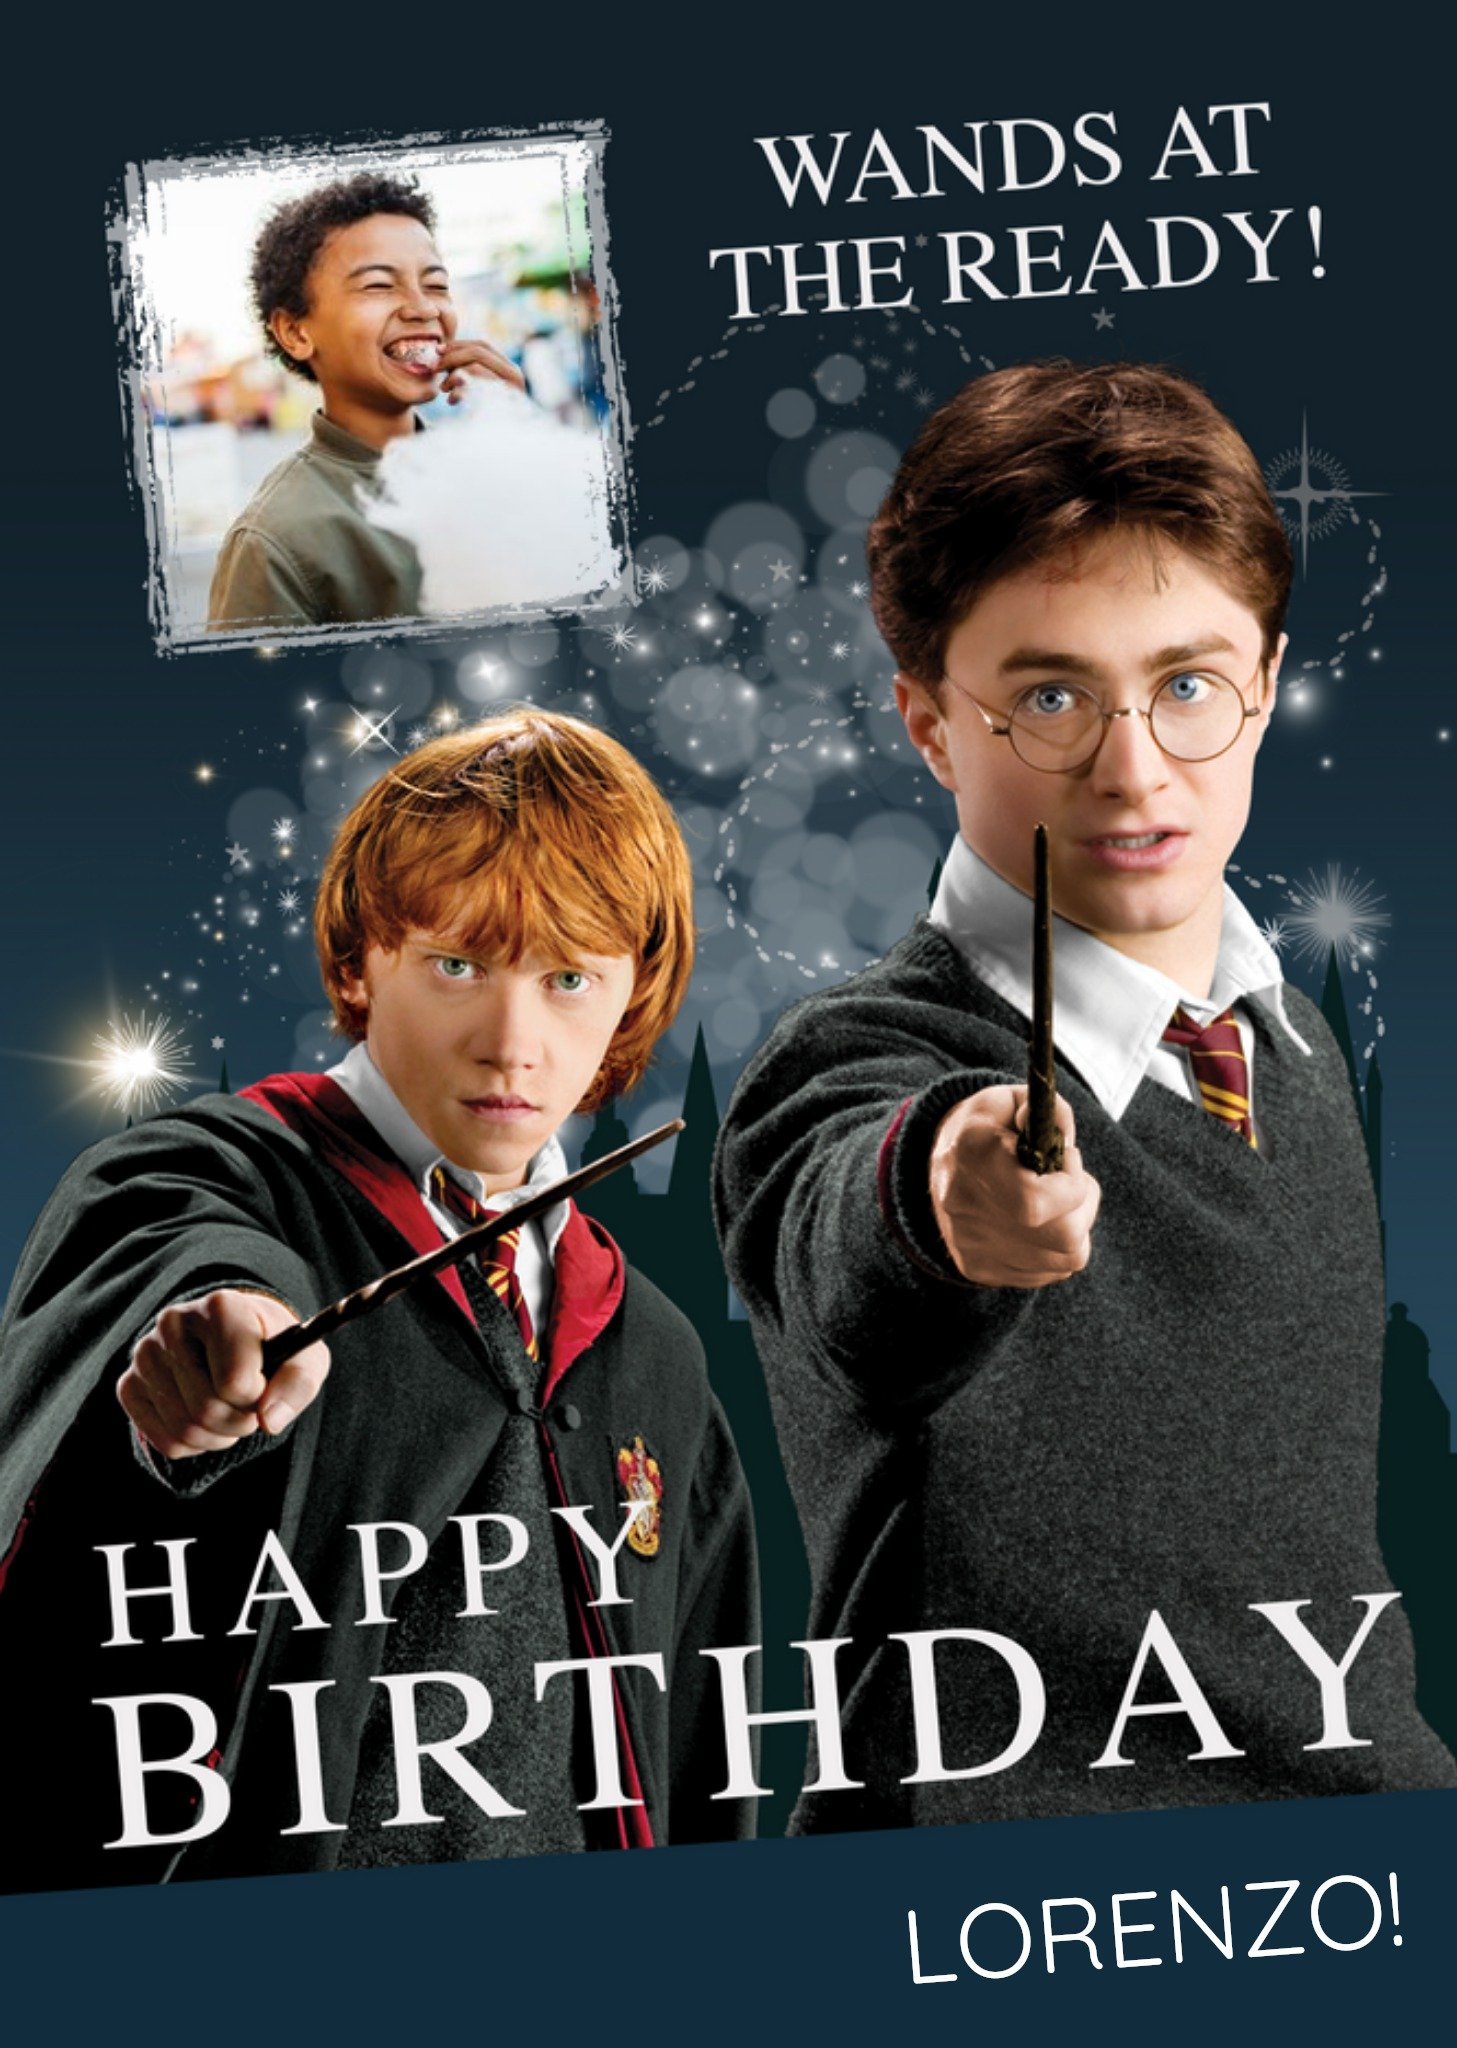 Harry Potter Wands At The Read Photo Upload Birthday Card Ecard